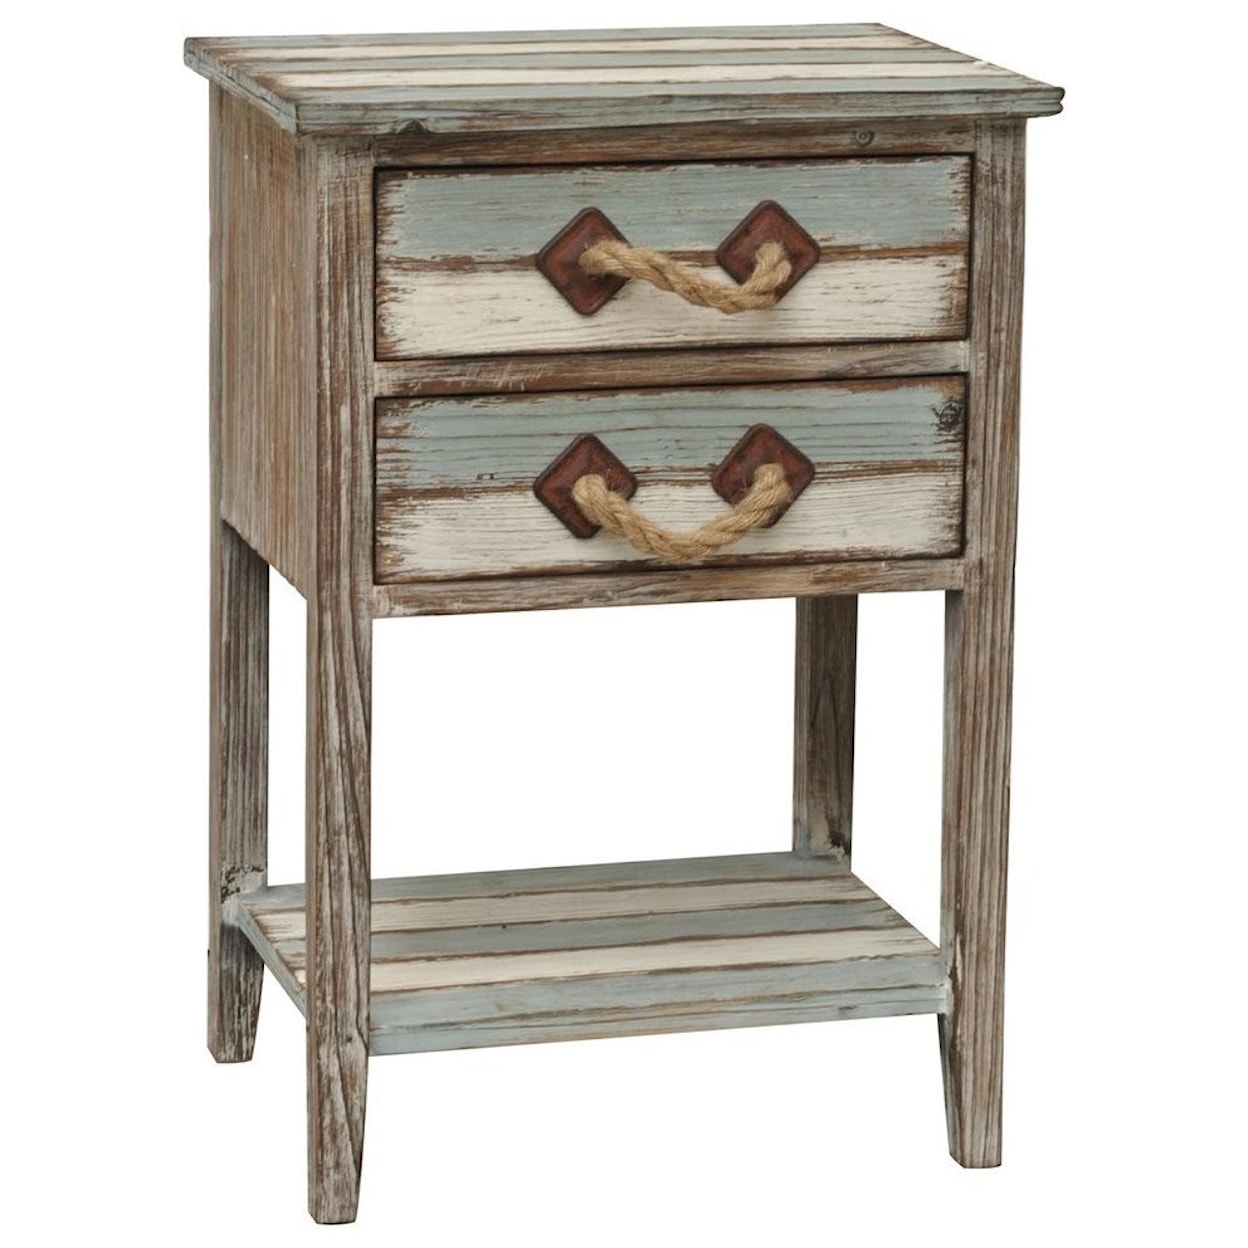 Crestview Collection Accent Furniture Nantucket 2 Drawer Weathered Wood Accent Tab